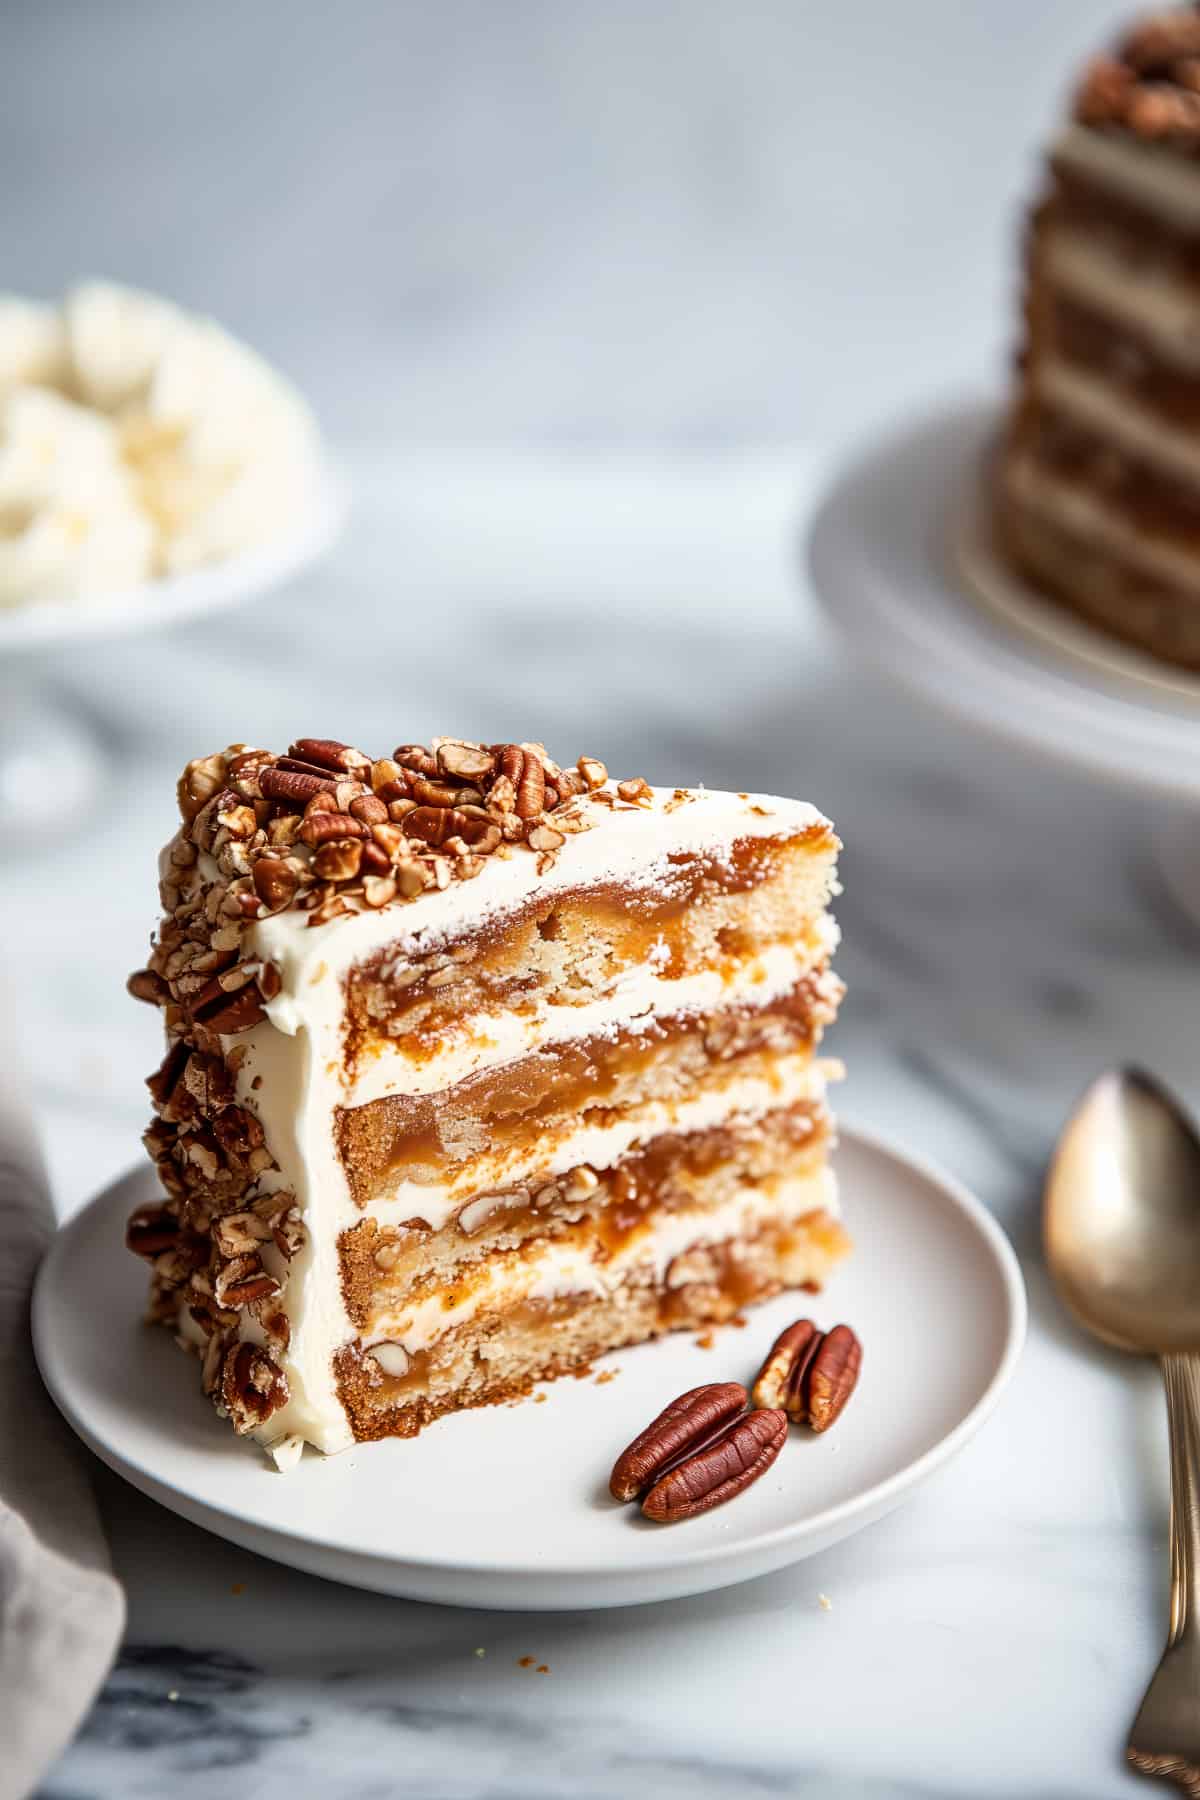 Soft and fluffy butter pecan cake with caramel sauce.